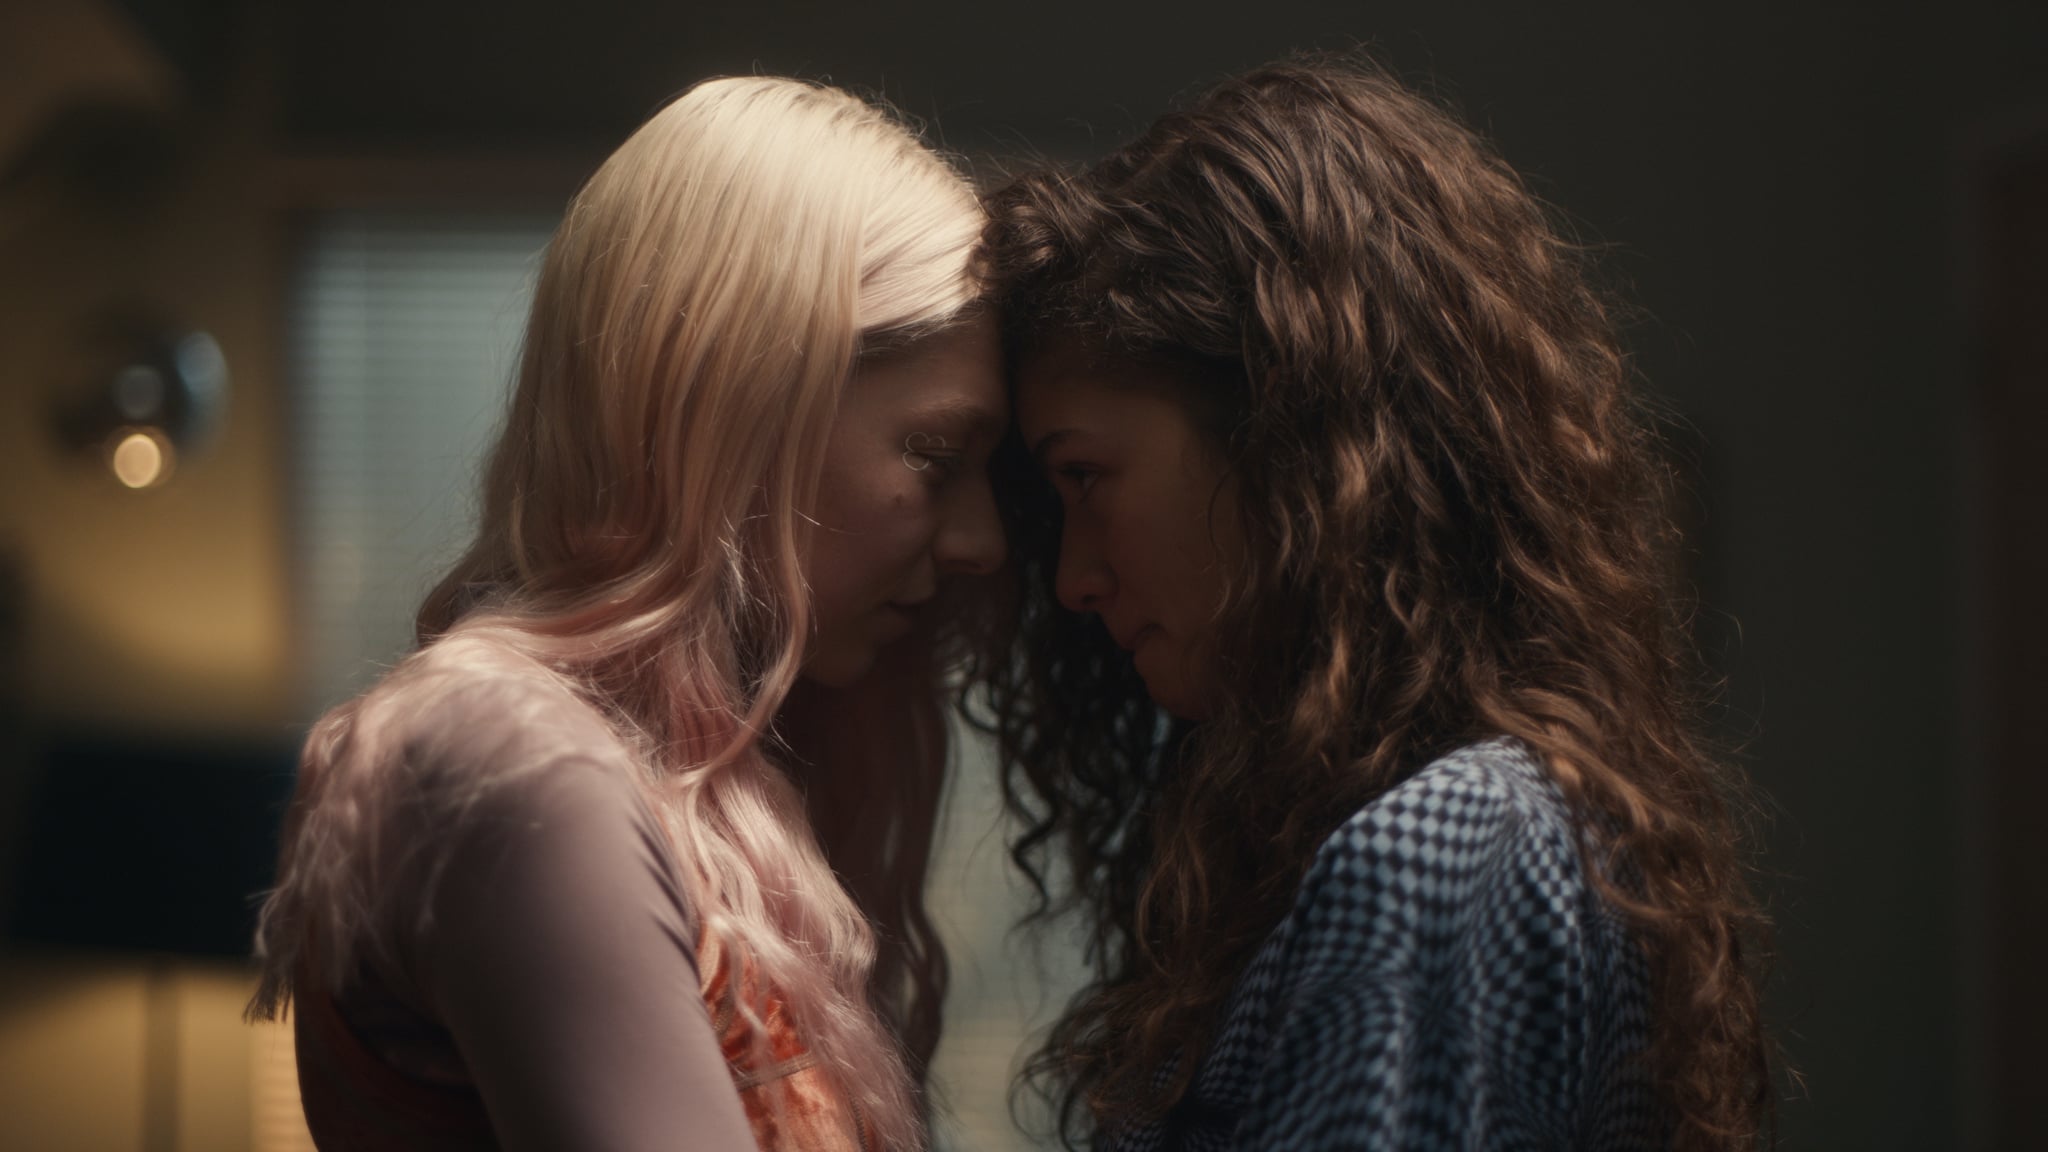 How Graphic Is Euphoria on HBO?